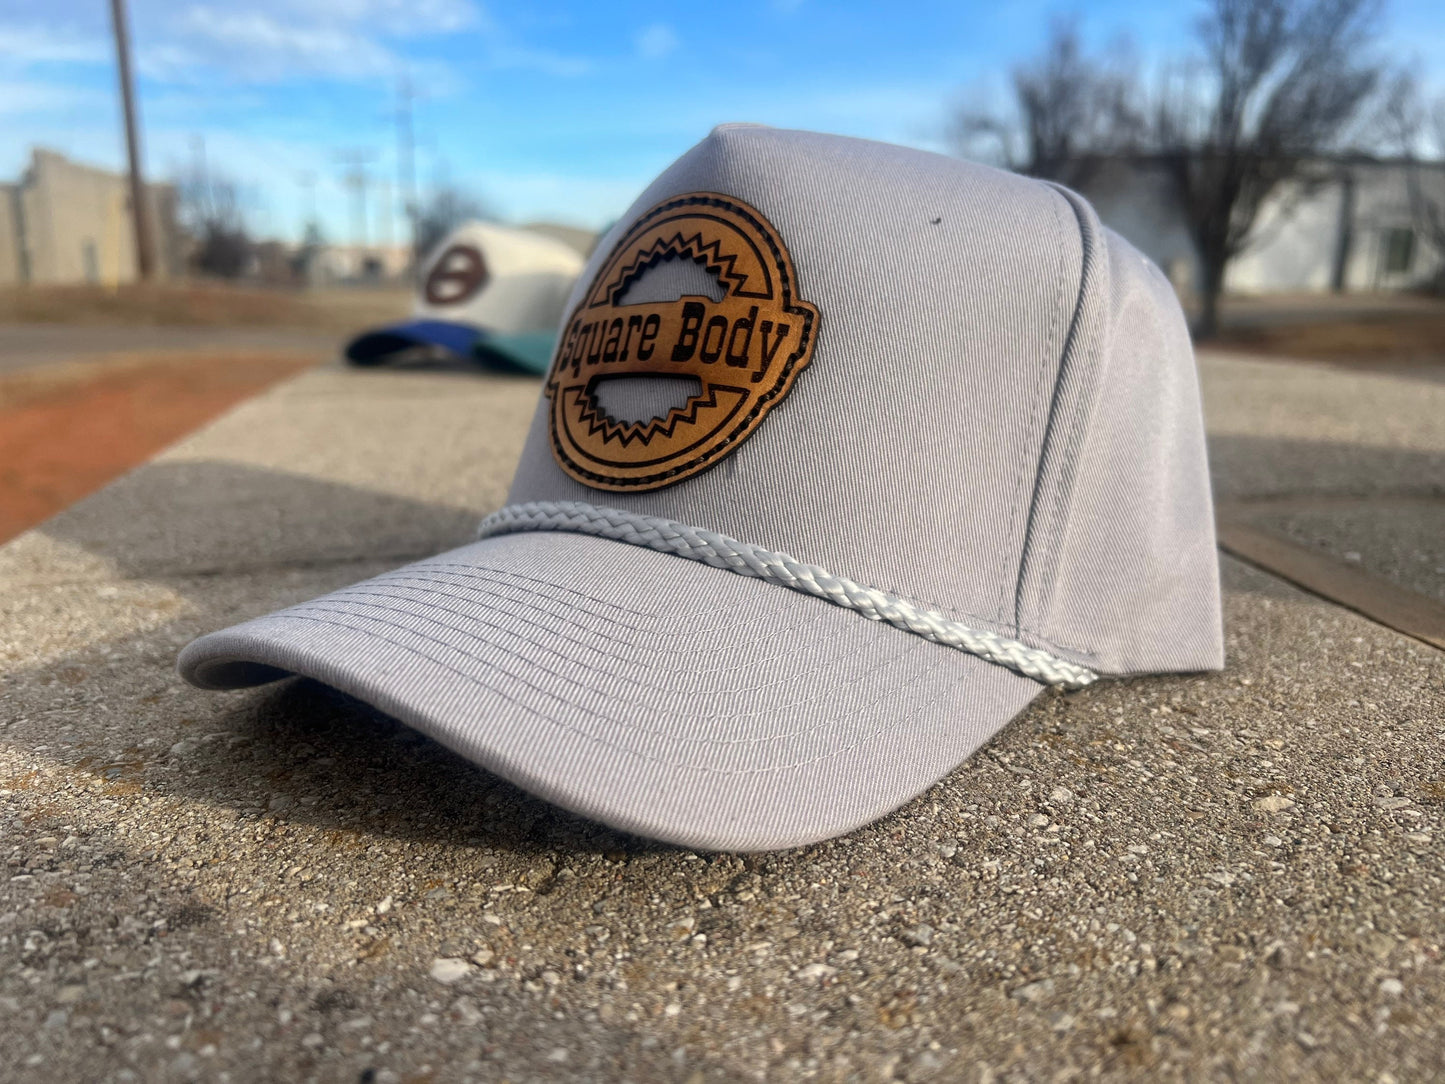 Leather Patch Chevy Squarebody Silverado Hat - Cobra Snap Back Trucker Rope Cap, Classic Truck Enthusiast Gift, Vintage Style